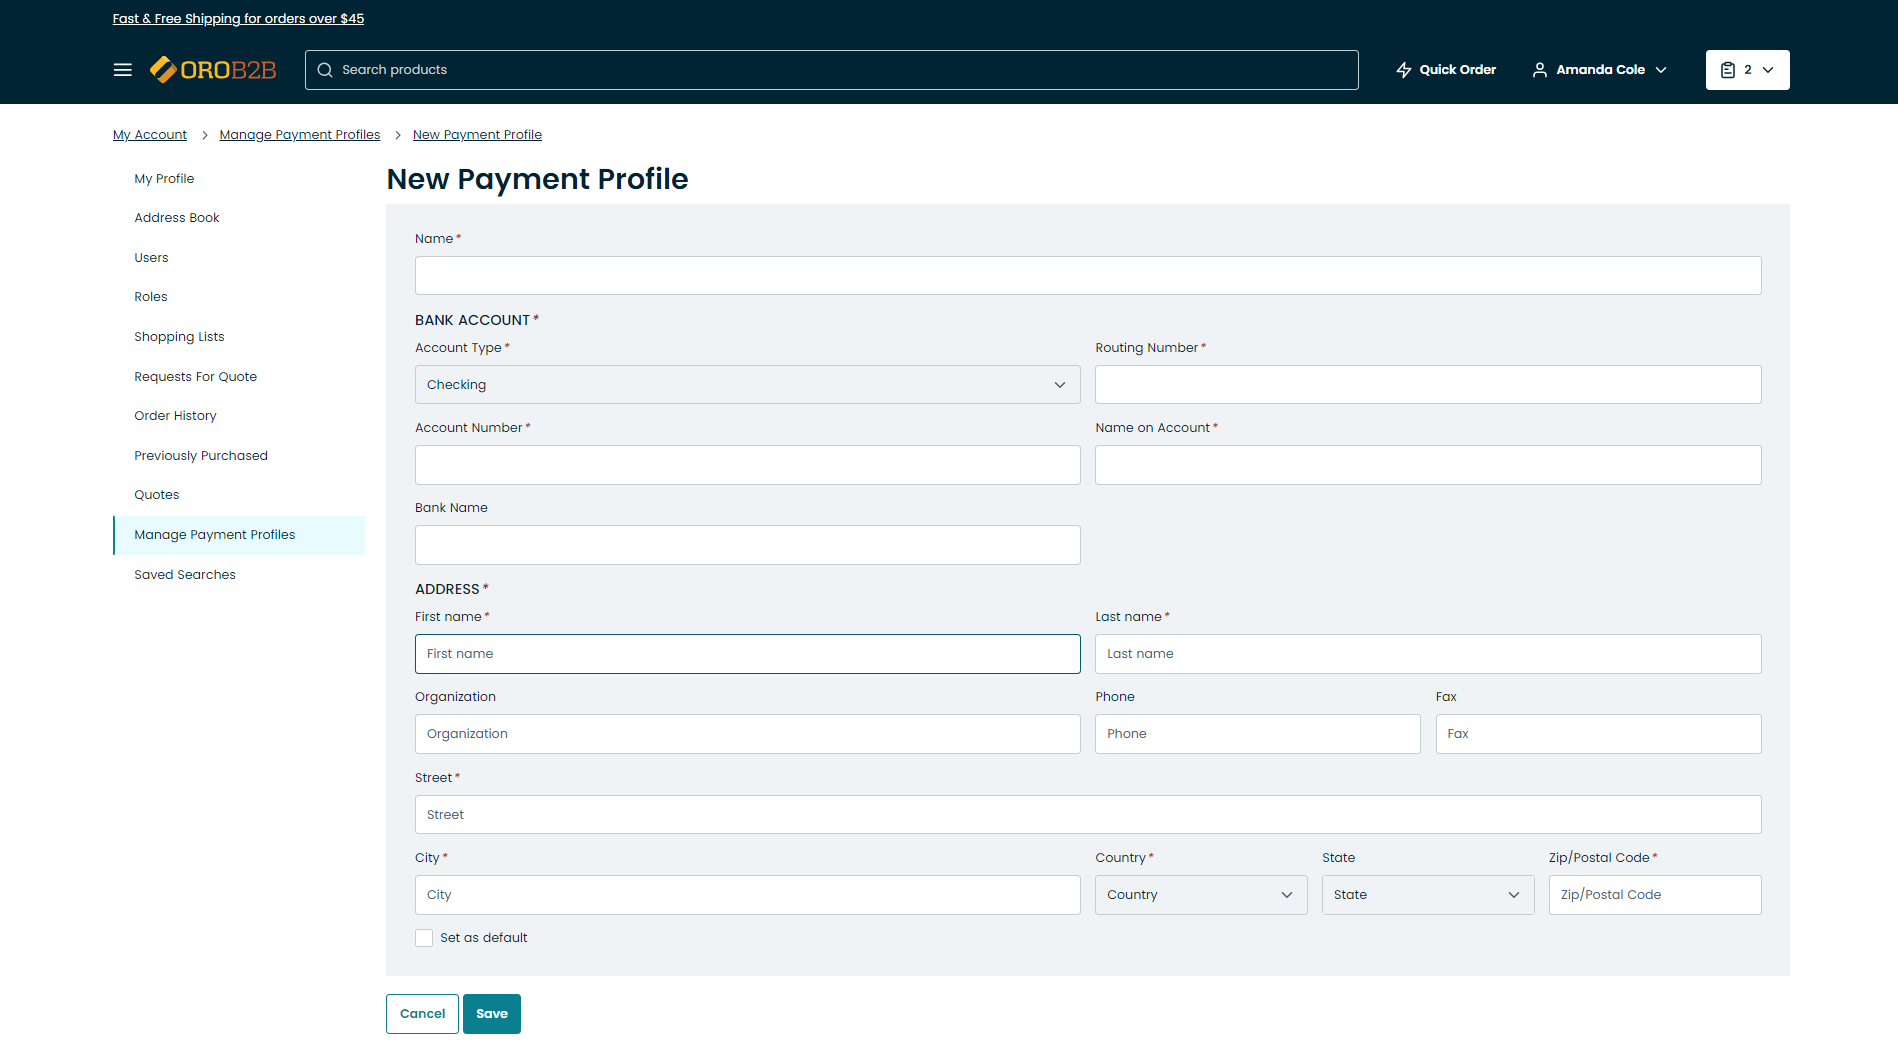 Add a new bank account payment profile